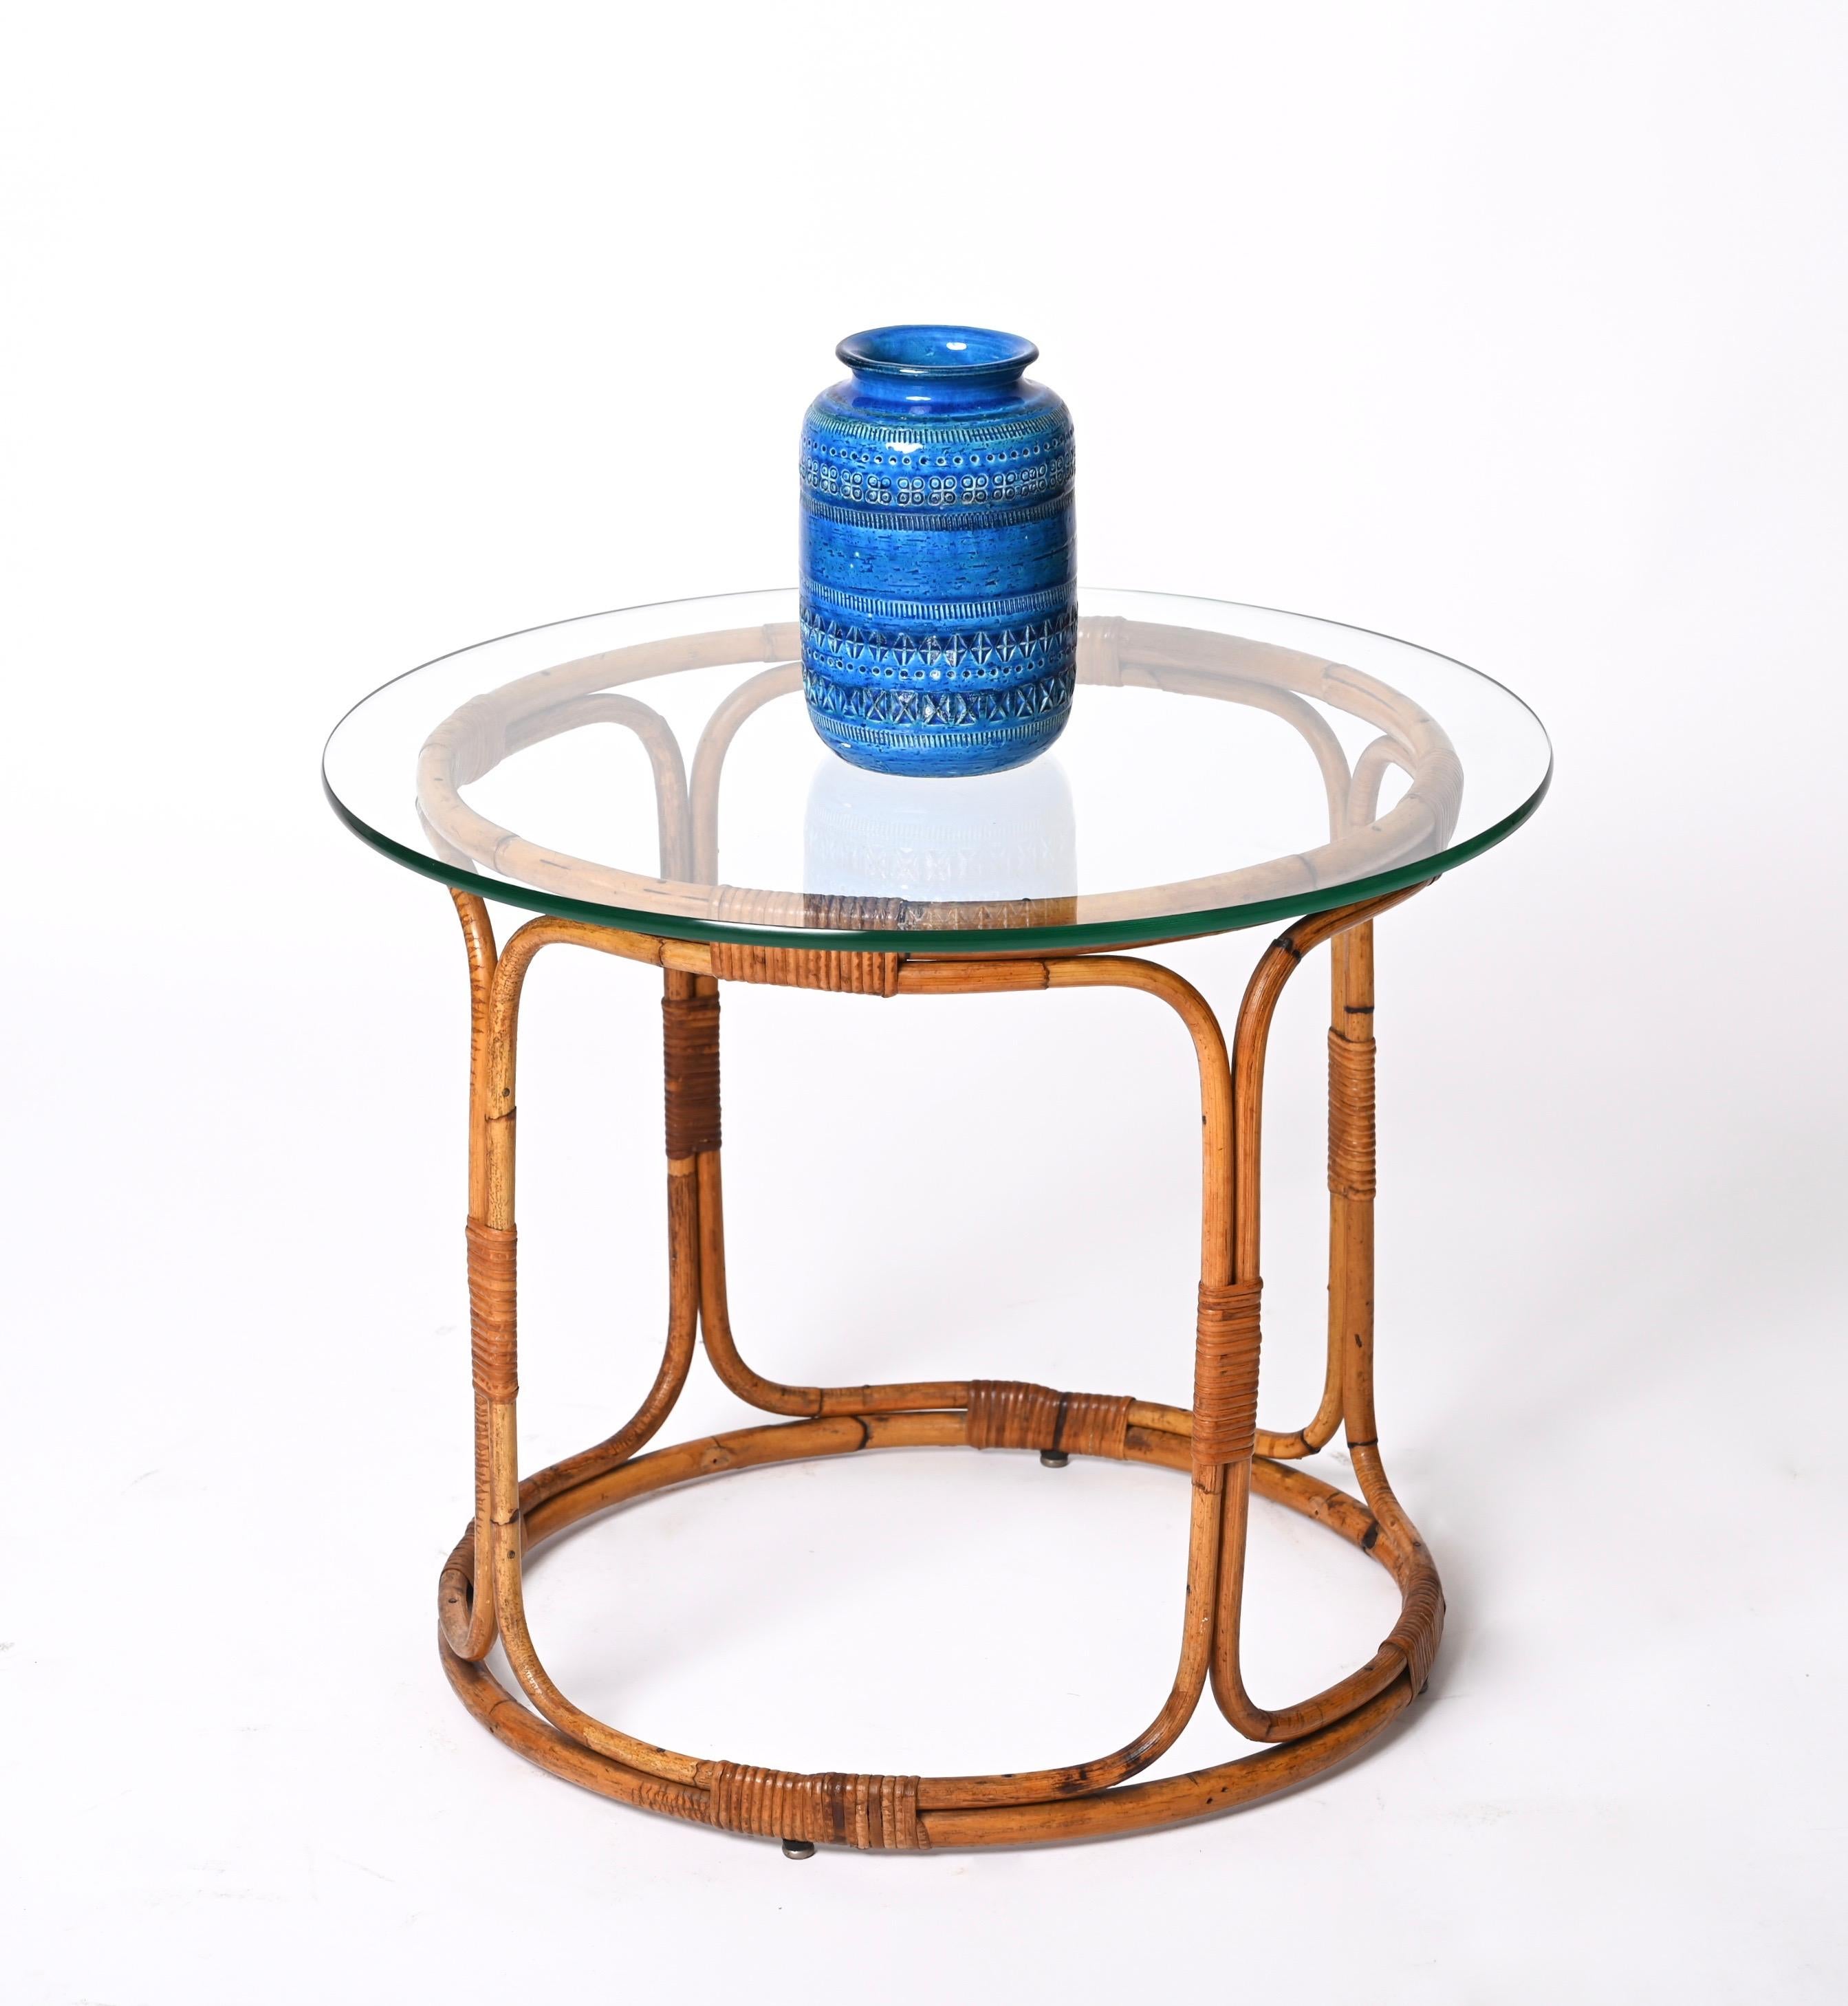 Midcentury Round Rattan, Bamboo Italian Coffee Table with Glass Shelf, 1960s For Sale 2